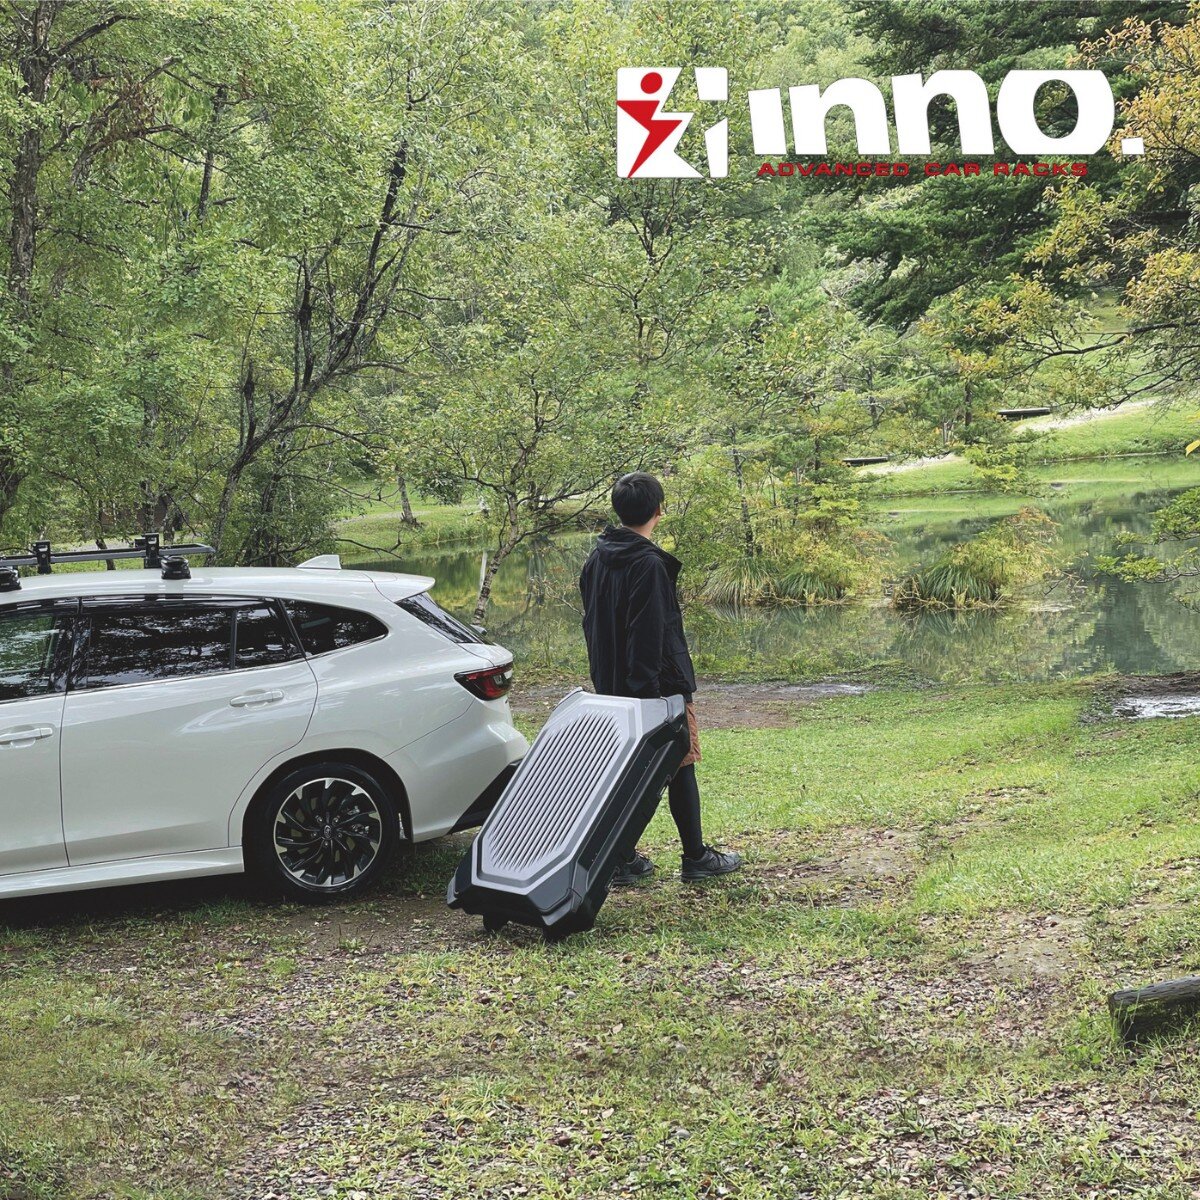 Bring all your cargo with Inno Rack&rsquo;s cargo box.

Inno Rack&rsquo;s innovative cargo box can be removed from your roof top bar quickly and easily, letting you wheel your items to your favorite location. This compact box can carry more with its 